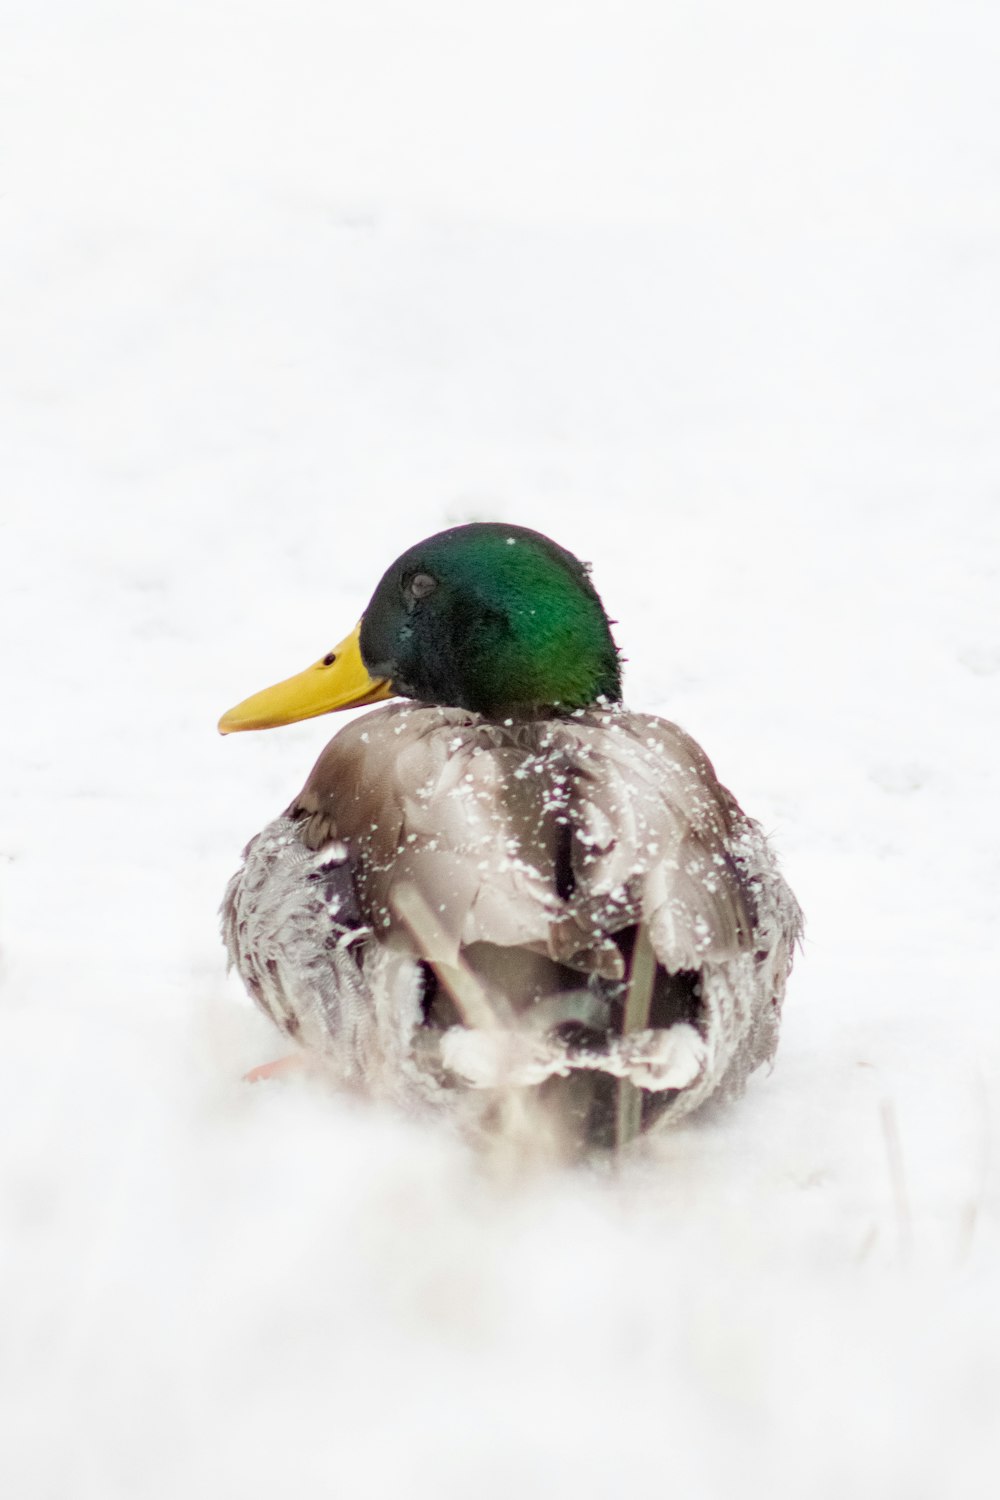 green and brown mallard duck on snow covered ground